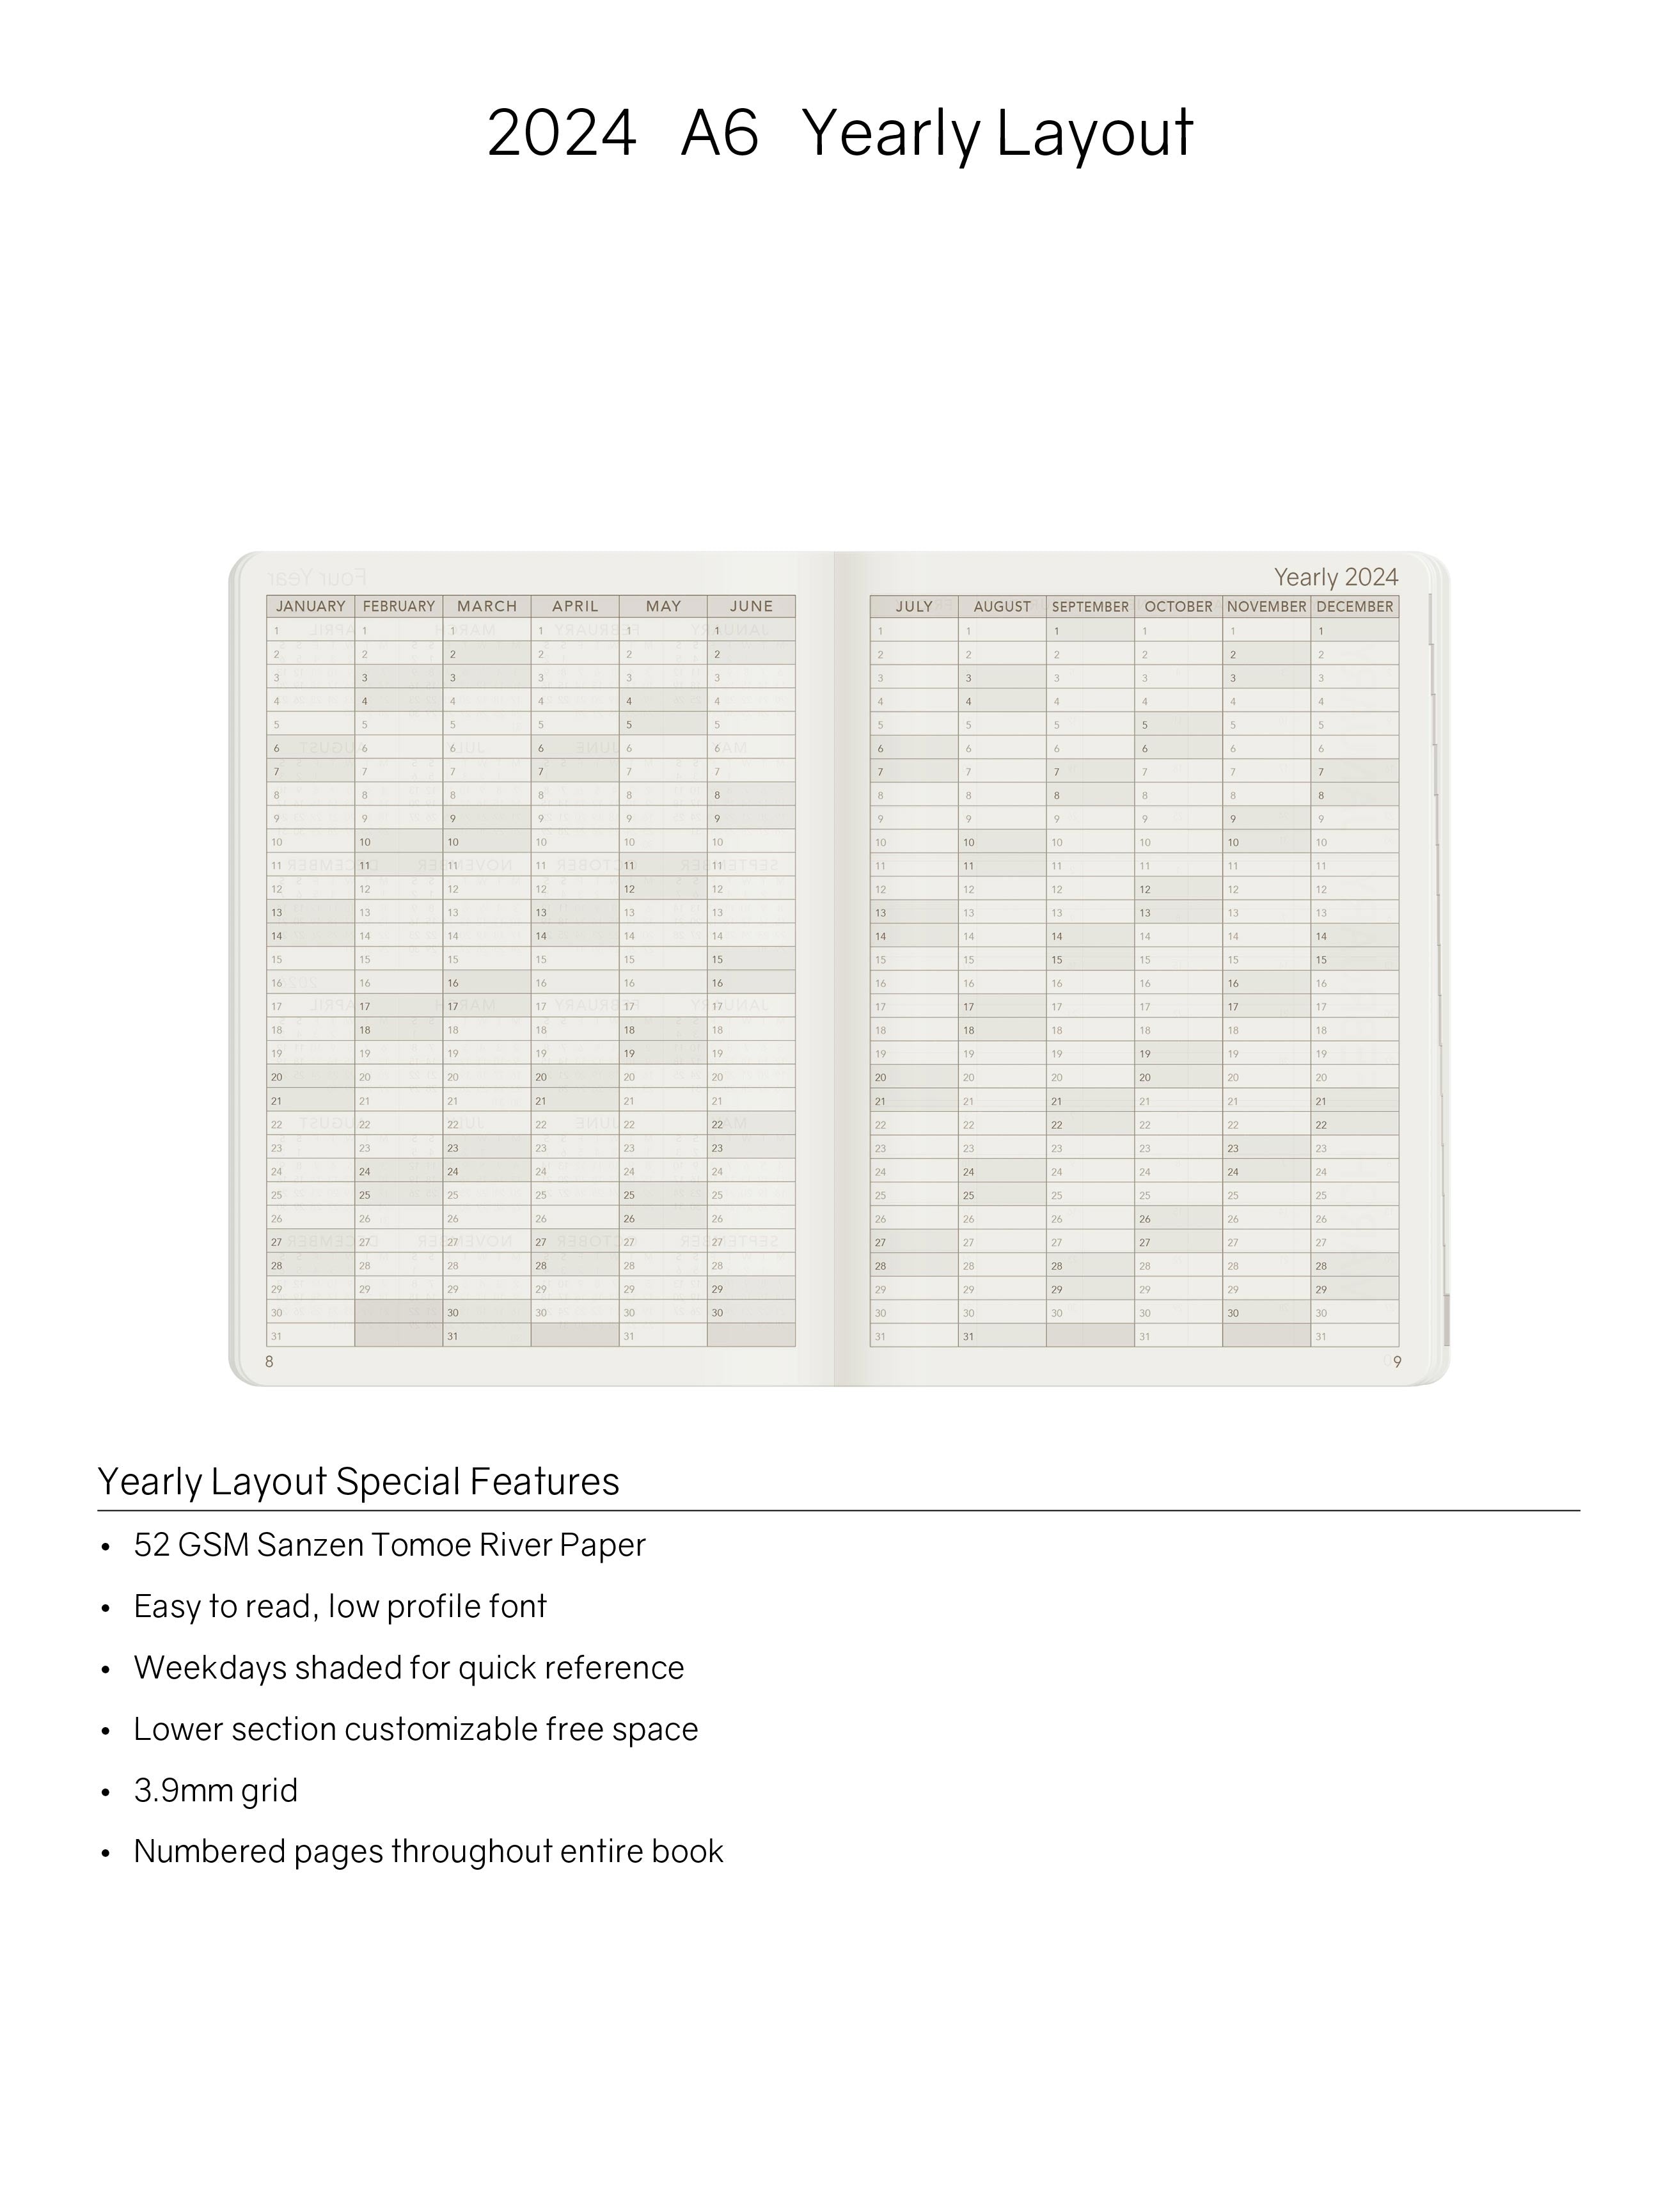 2024 A6 Weekly Planner - Alpine Lake (Blue) - 52gsm Tomoe River Paper (Stacked Weekends)